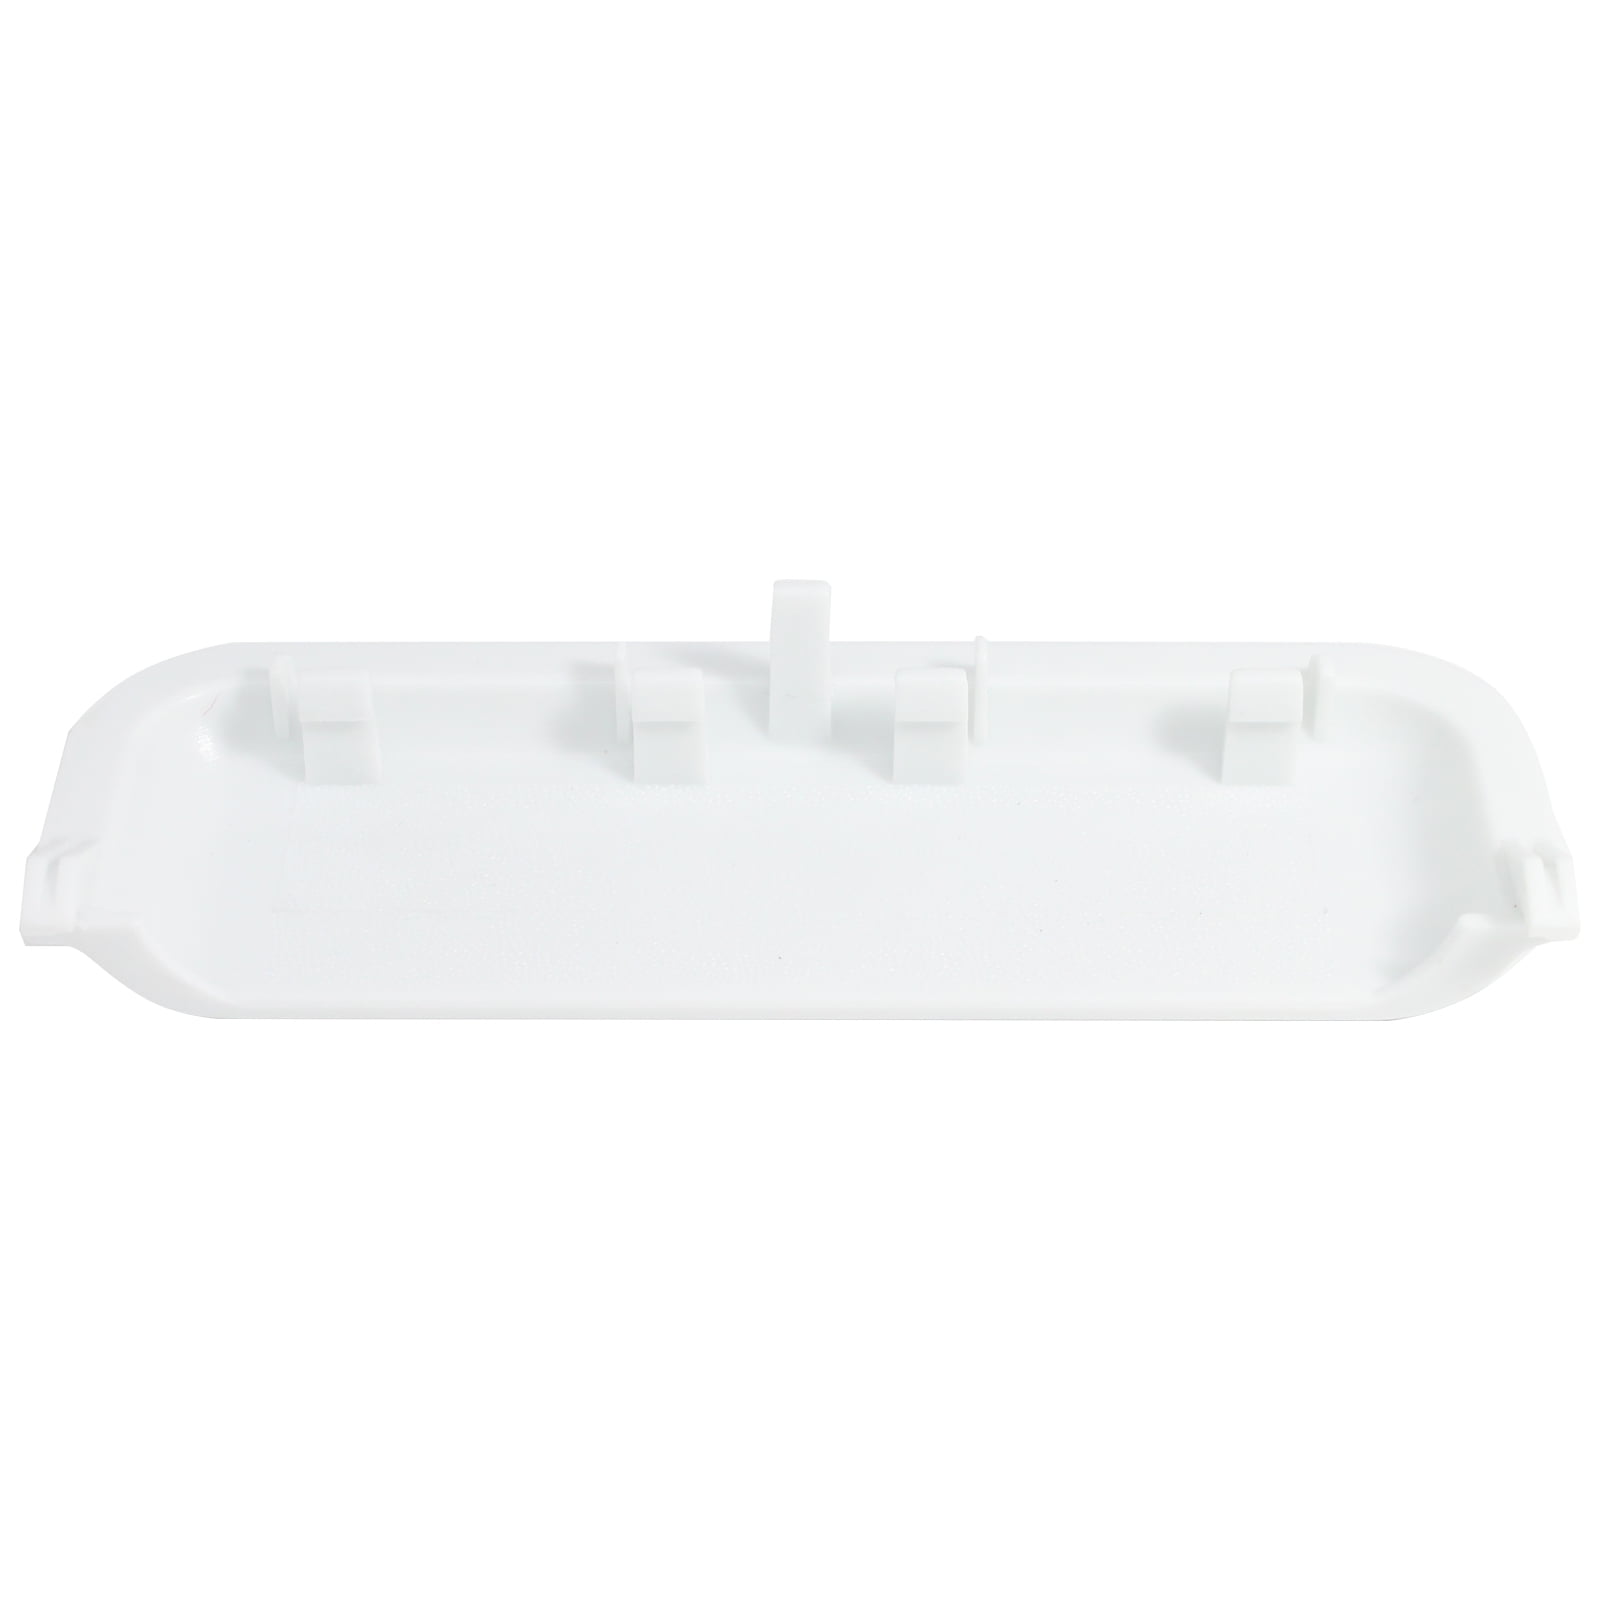 For Maytag Dryer White Door Handle # LA8939995PAMT980